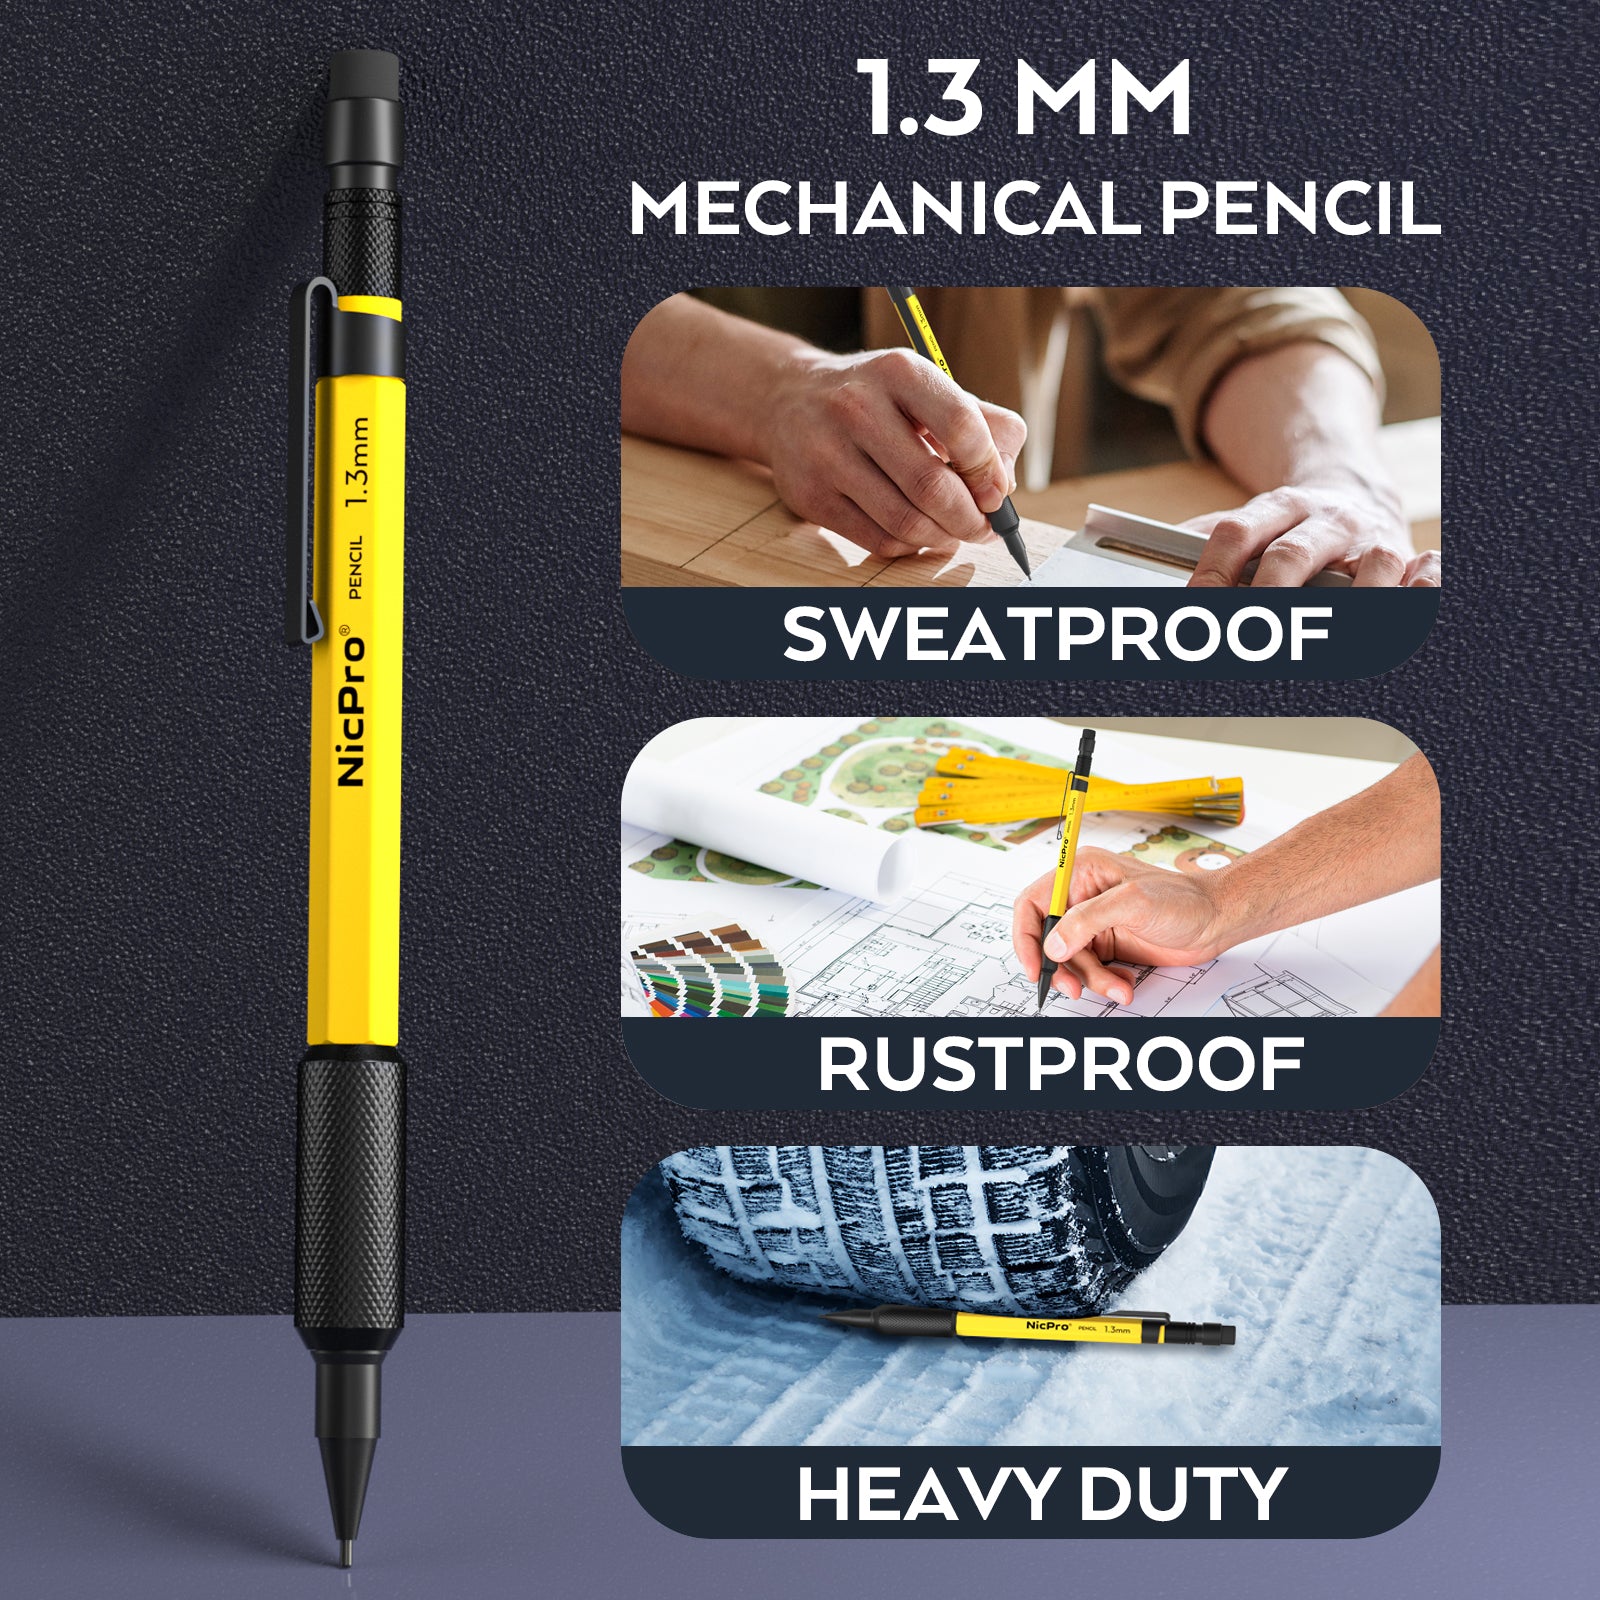 Nicpro 3 PCS 1.3 mm Mechanical Pencils Set with 36 Lead Refill, 3 Eraser - Weatherproof Metal Barrel, Heavy Duty Carpenter Pencil for Outdoor Marking Drafting Drawing Sketching Woodworking - with Case